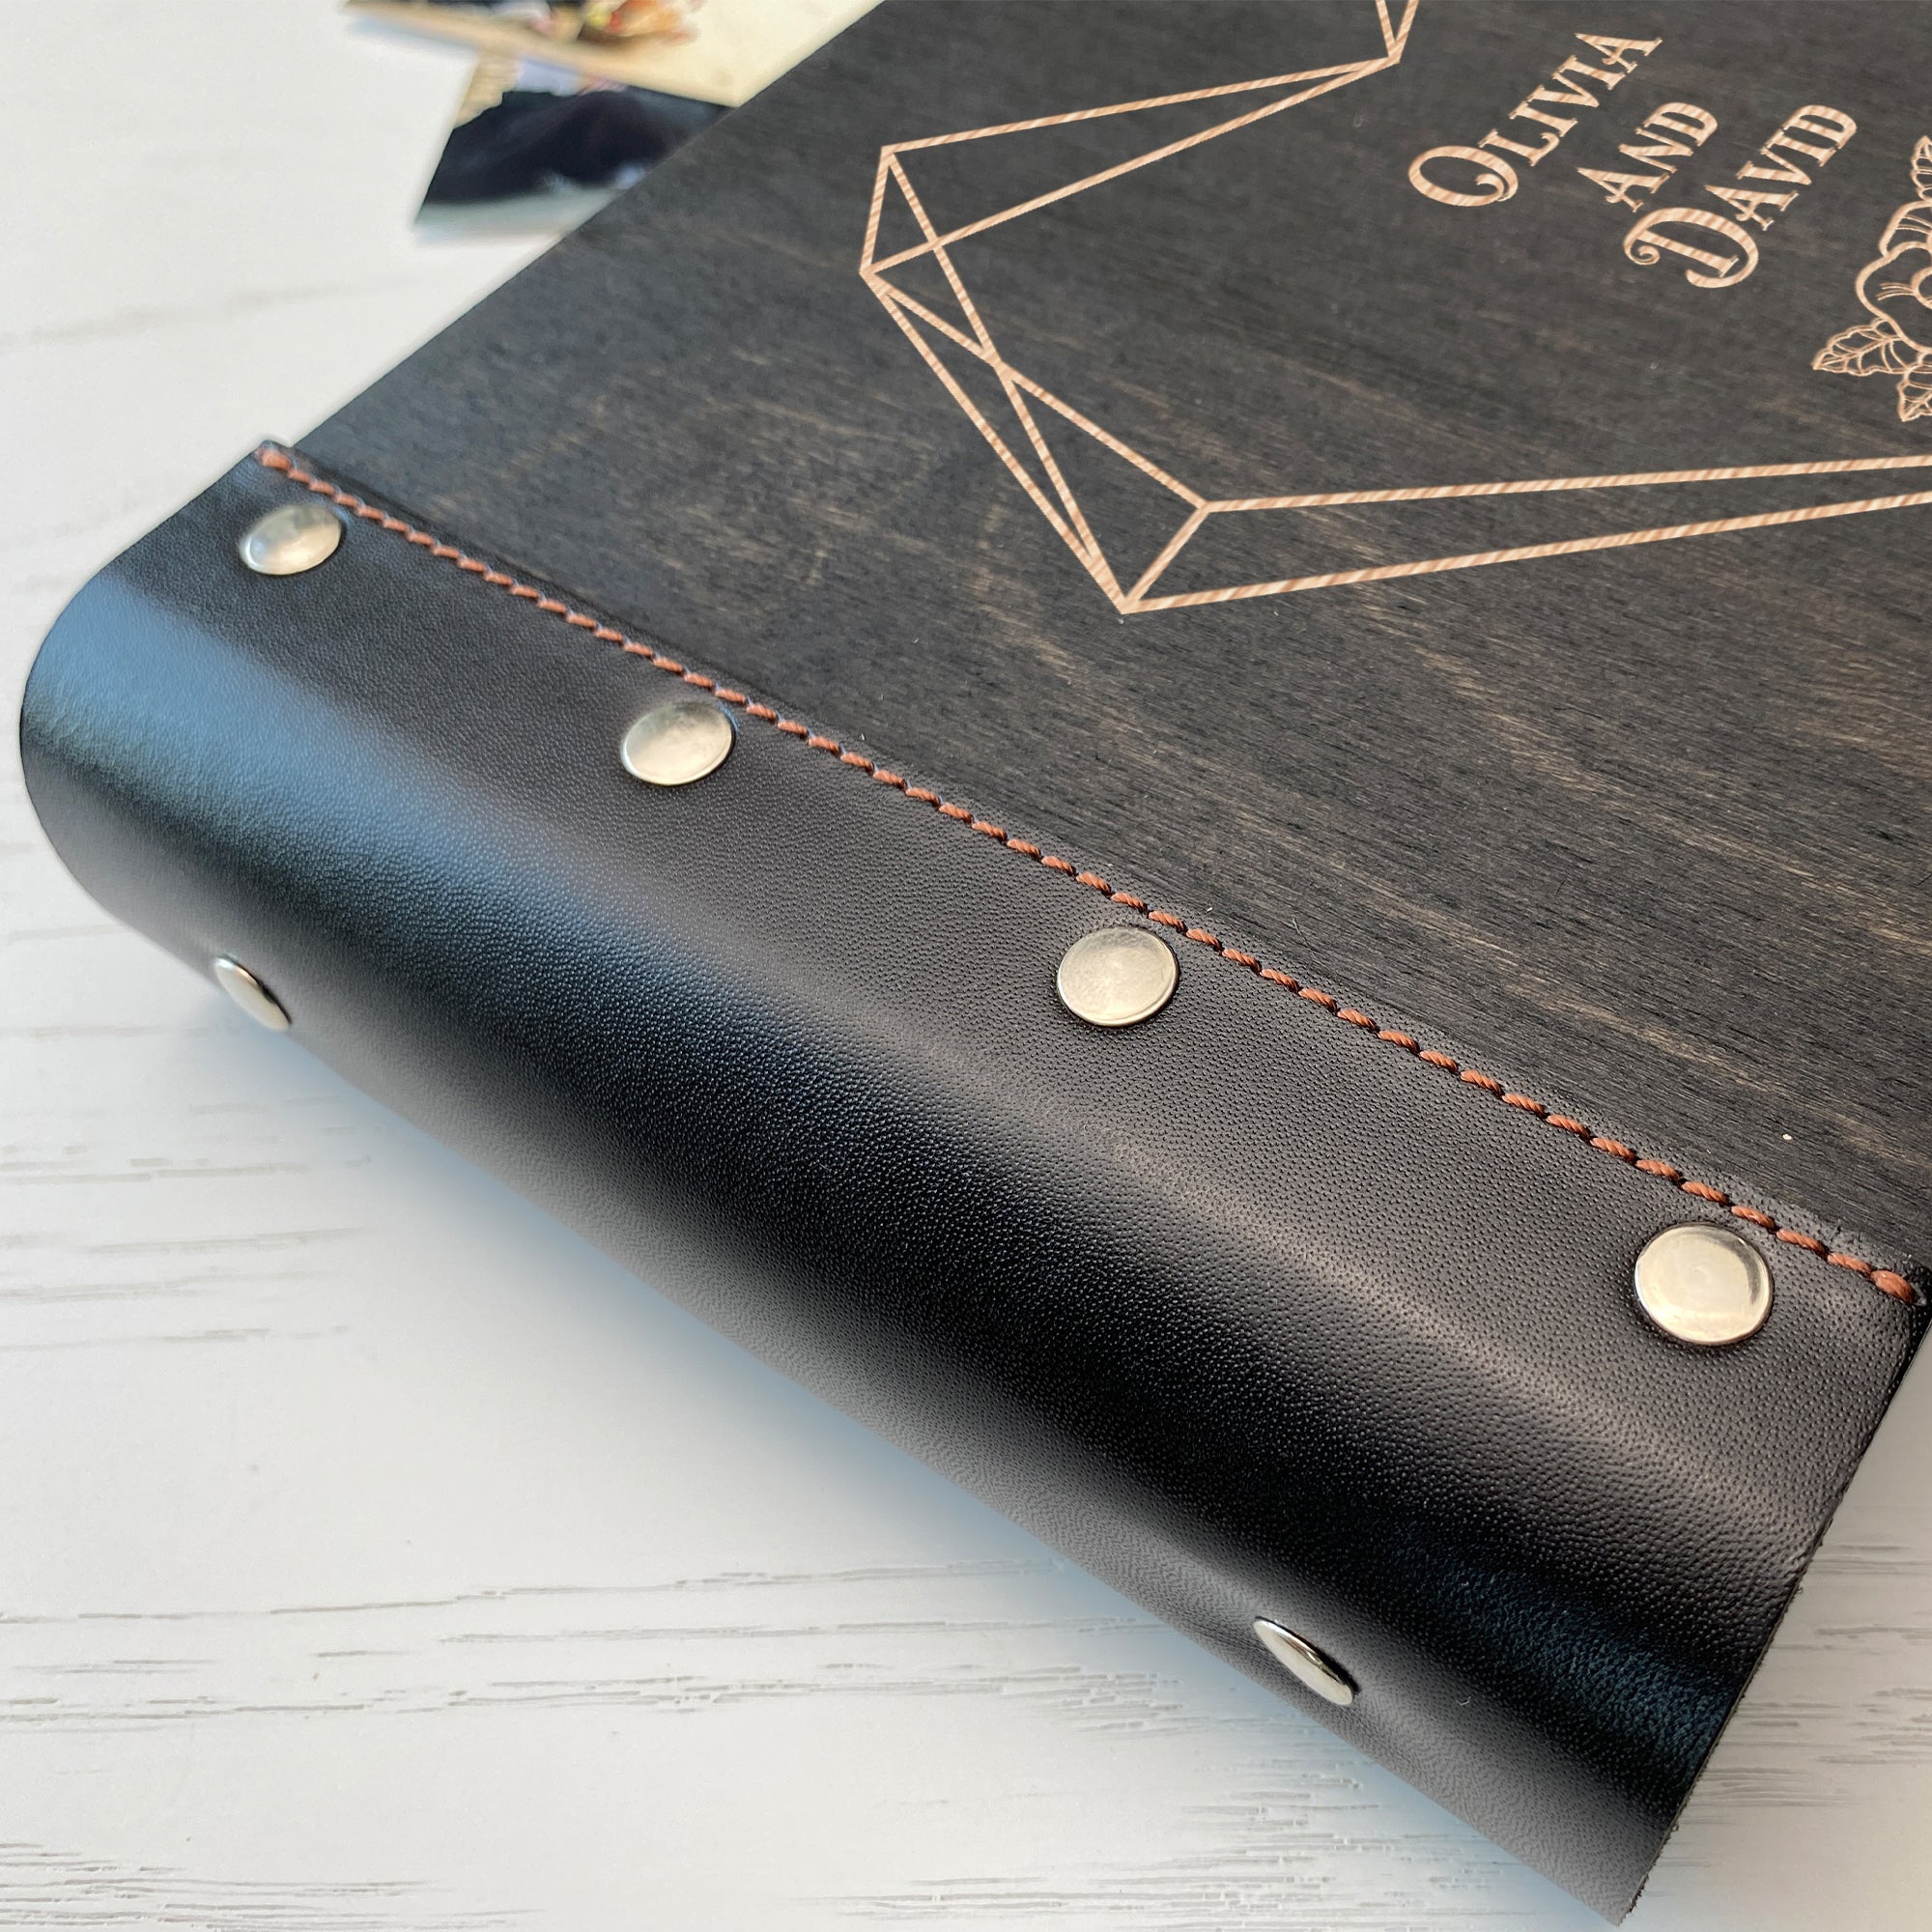 Personalized photo album with leather cover and Geometric Heart engraving